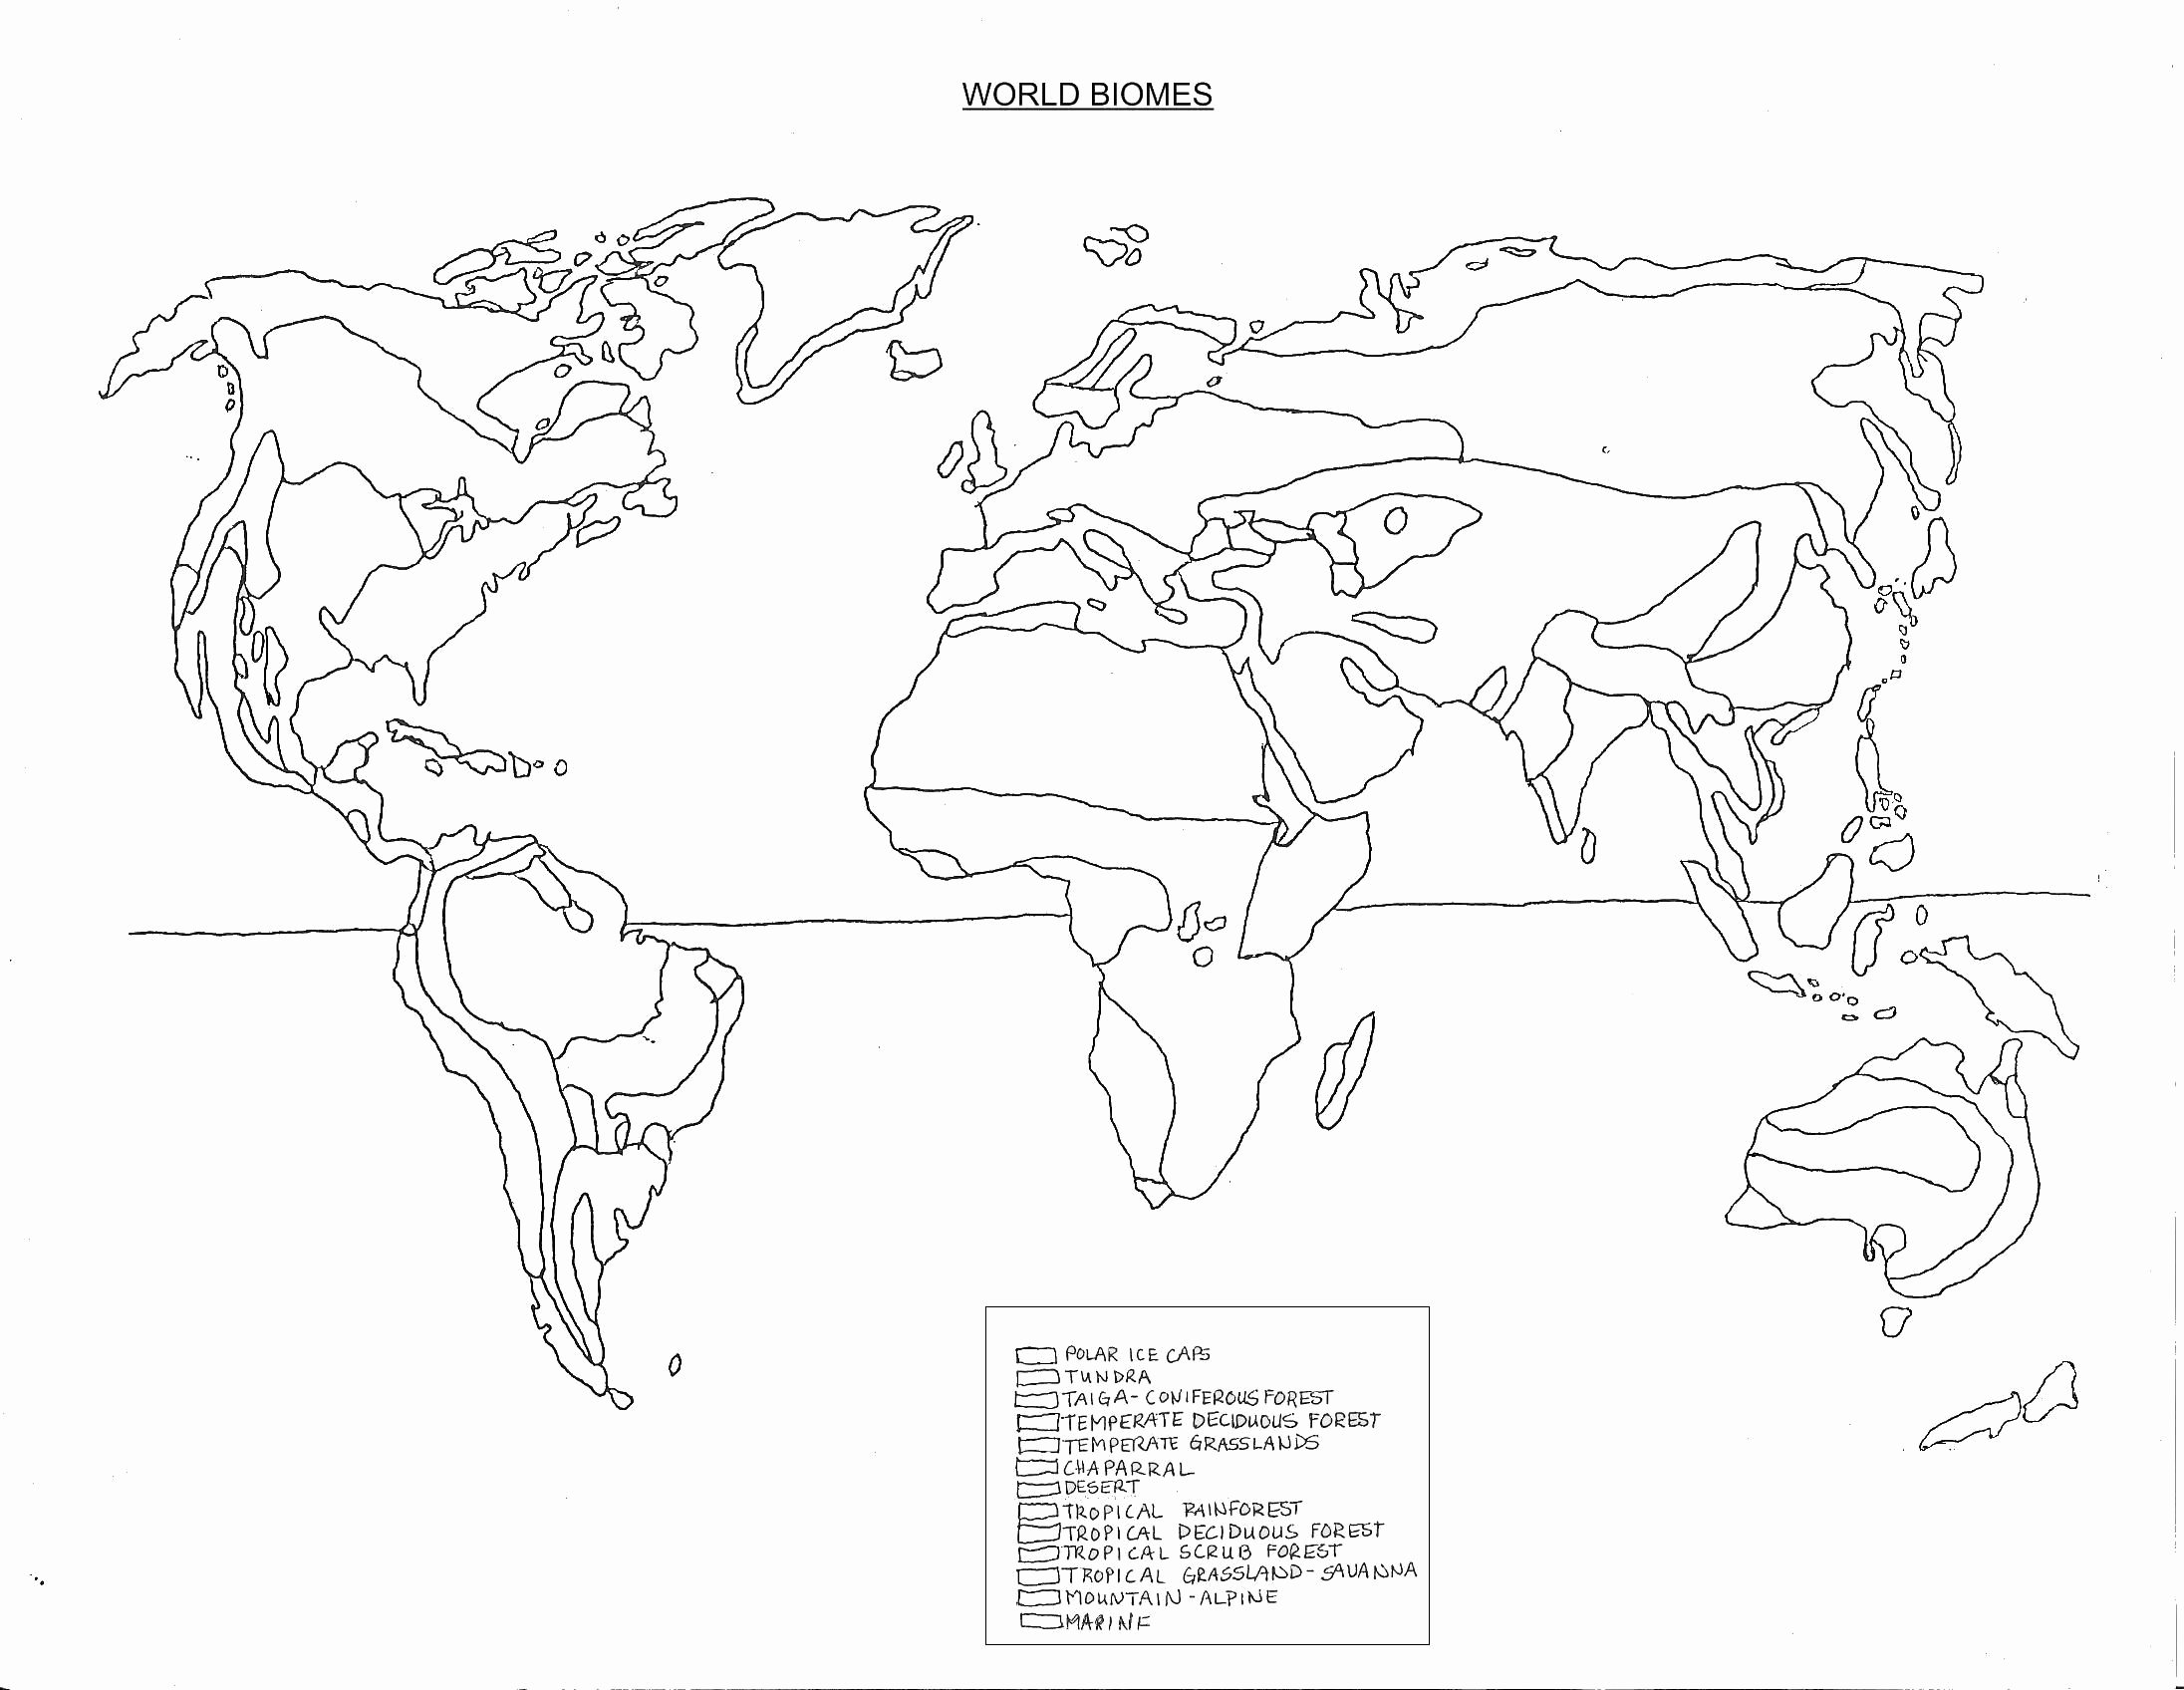 World Biome Map Coloring Worksheet Best Of World Biomes Map School Science